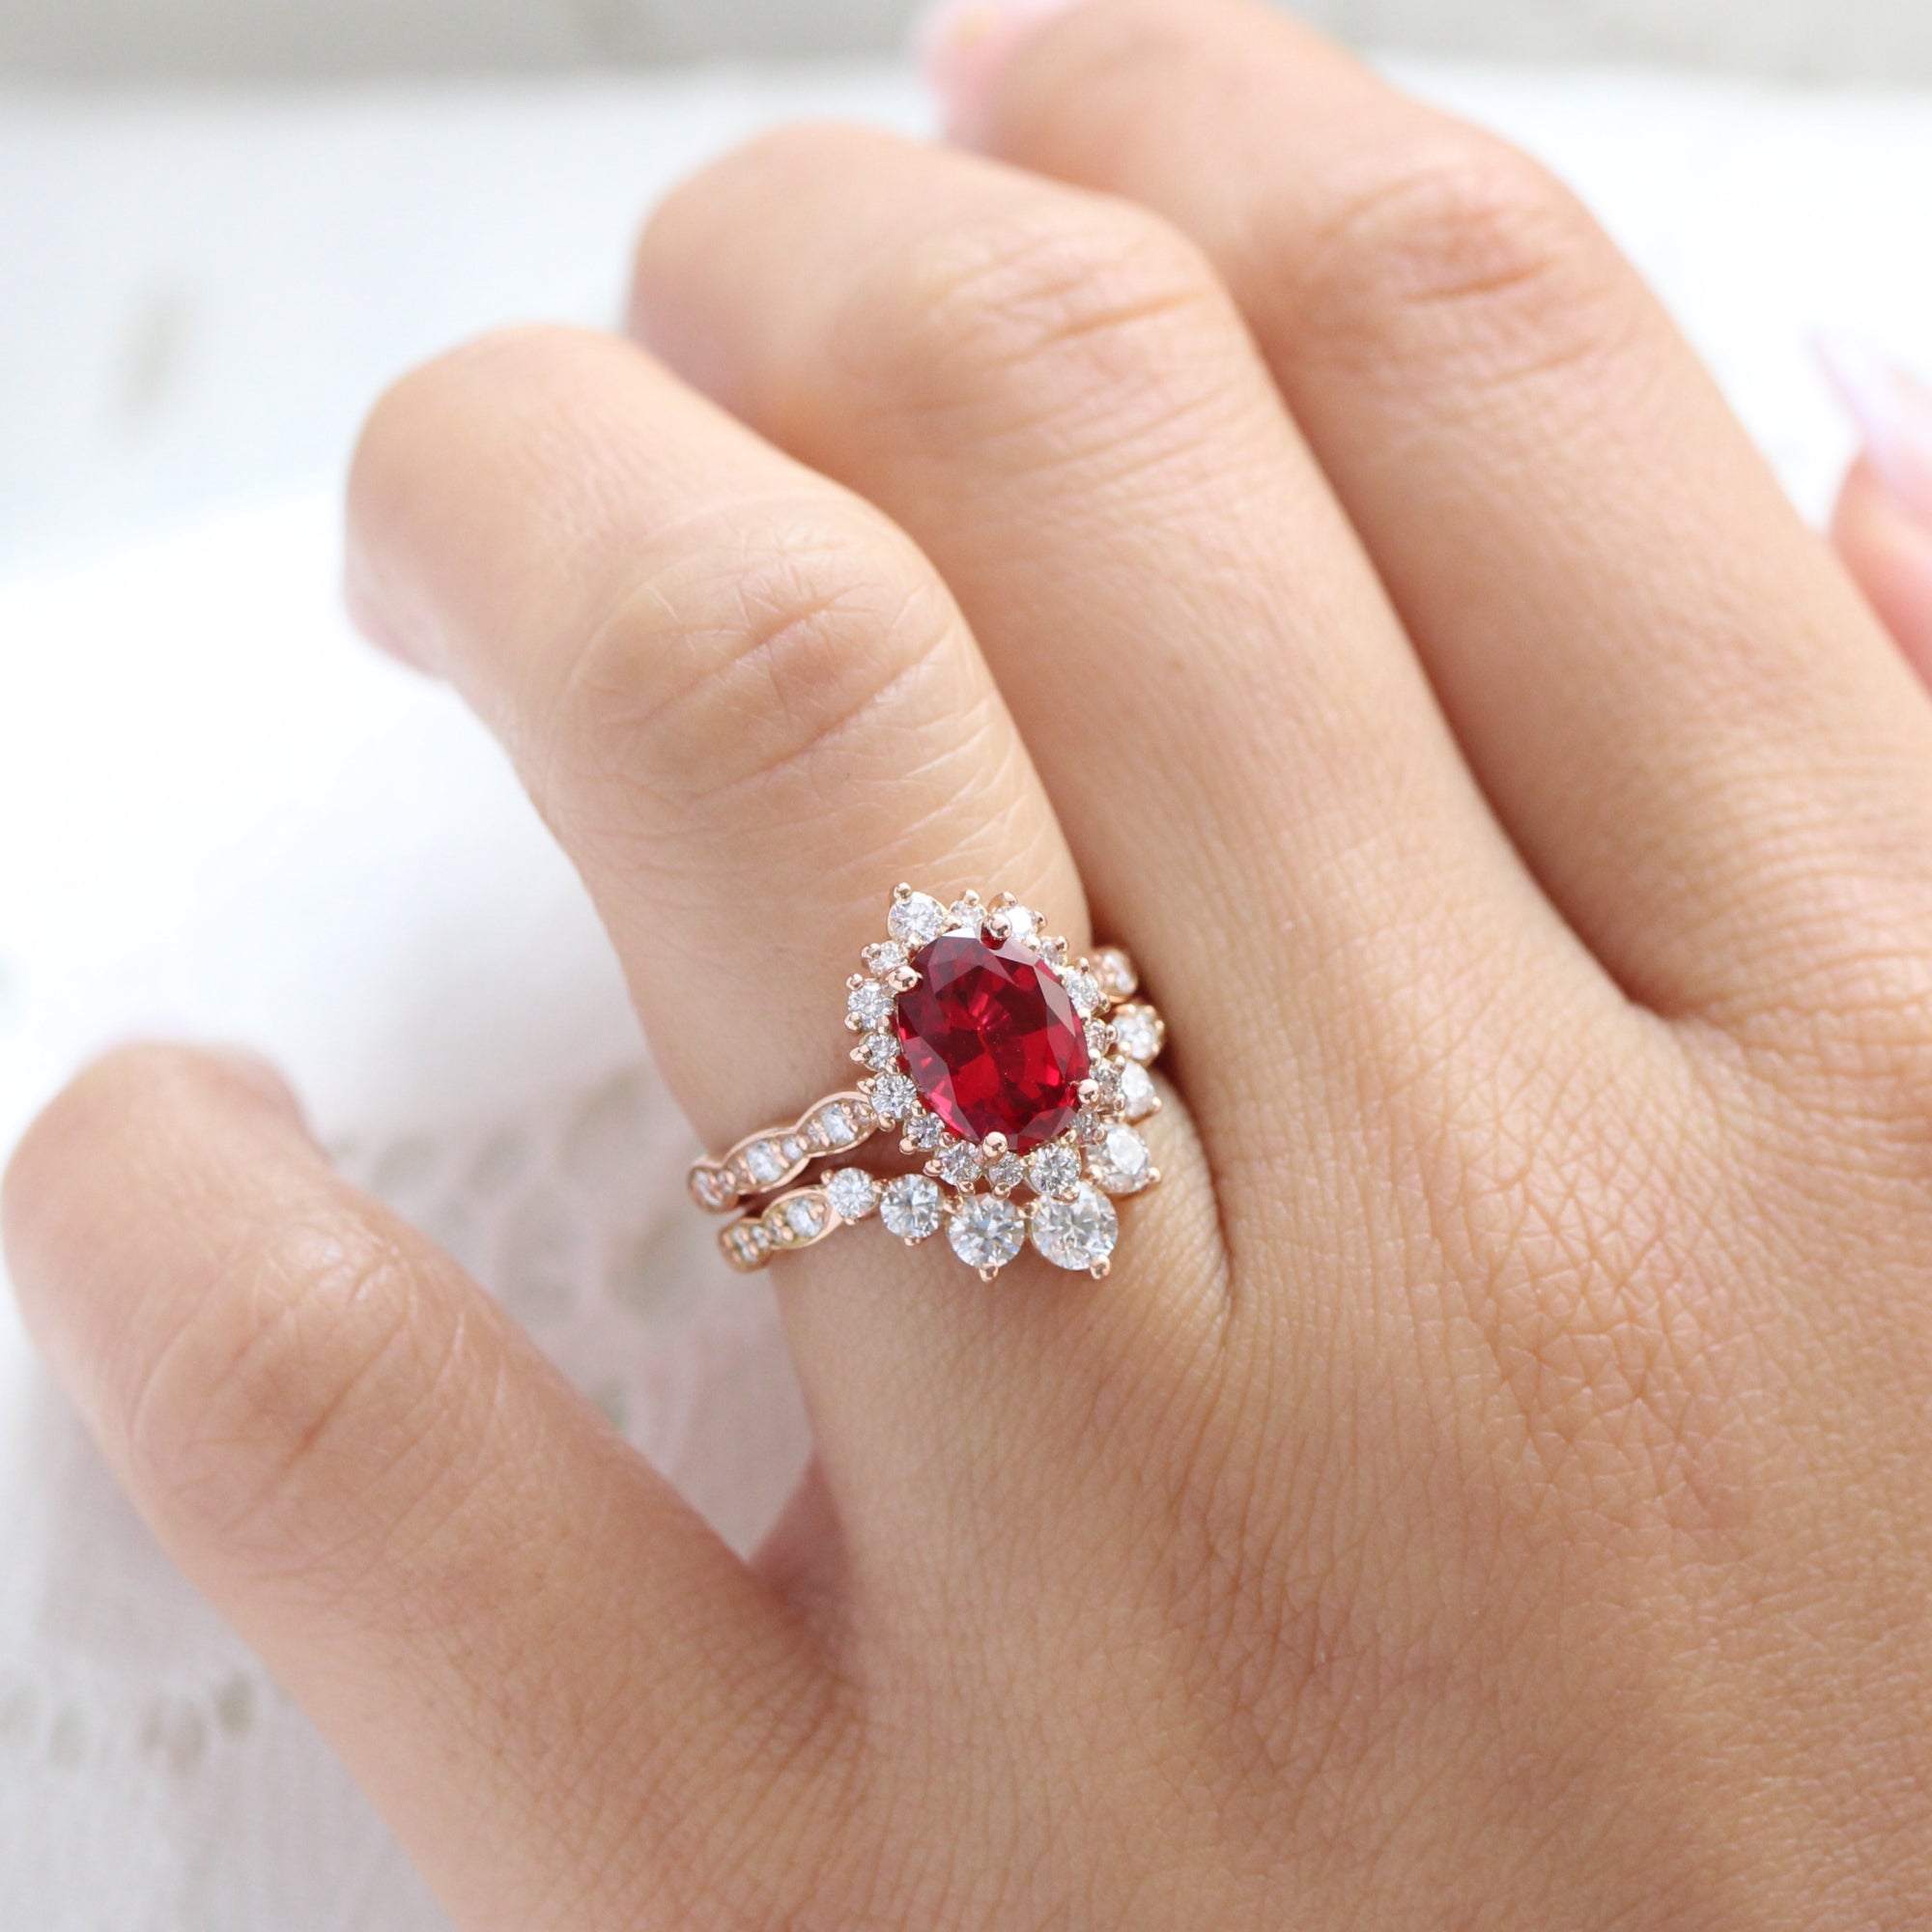 Aakhya Ruby Diamond Rings - Buy Finest Indian Imitation Fashion Jewellery  At Best Price.